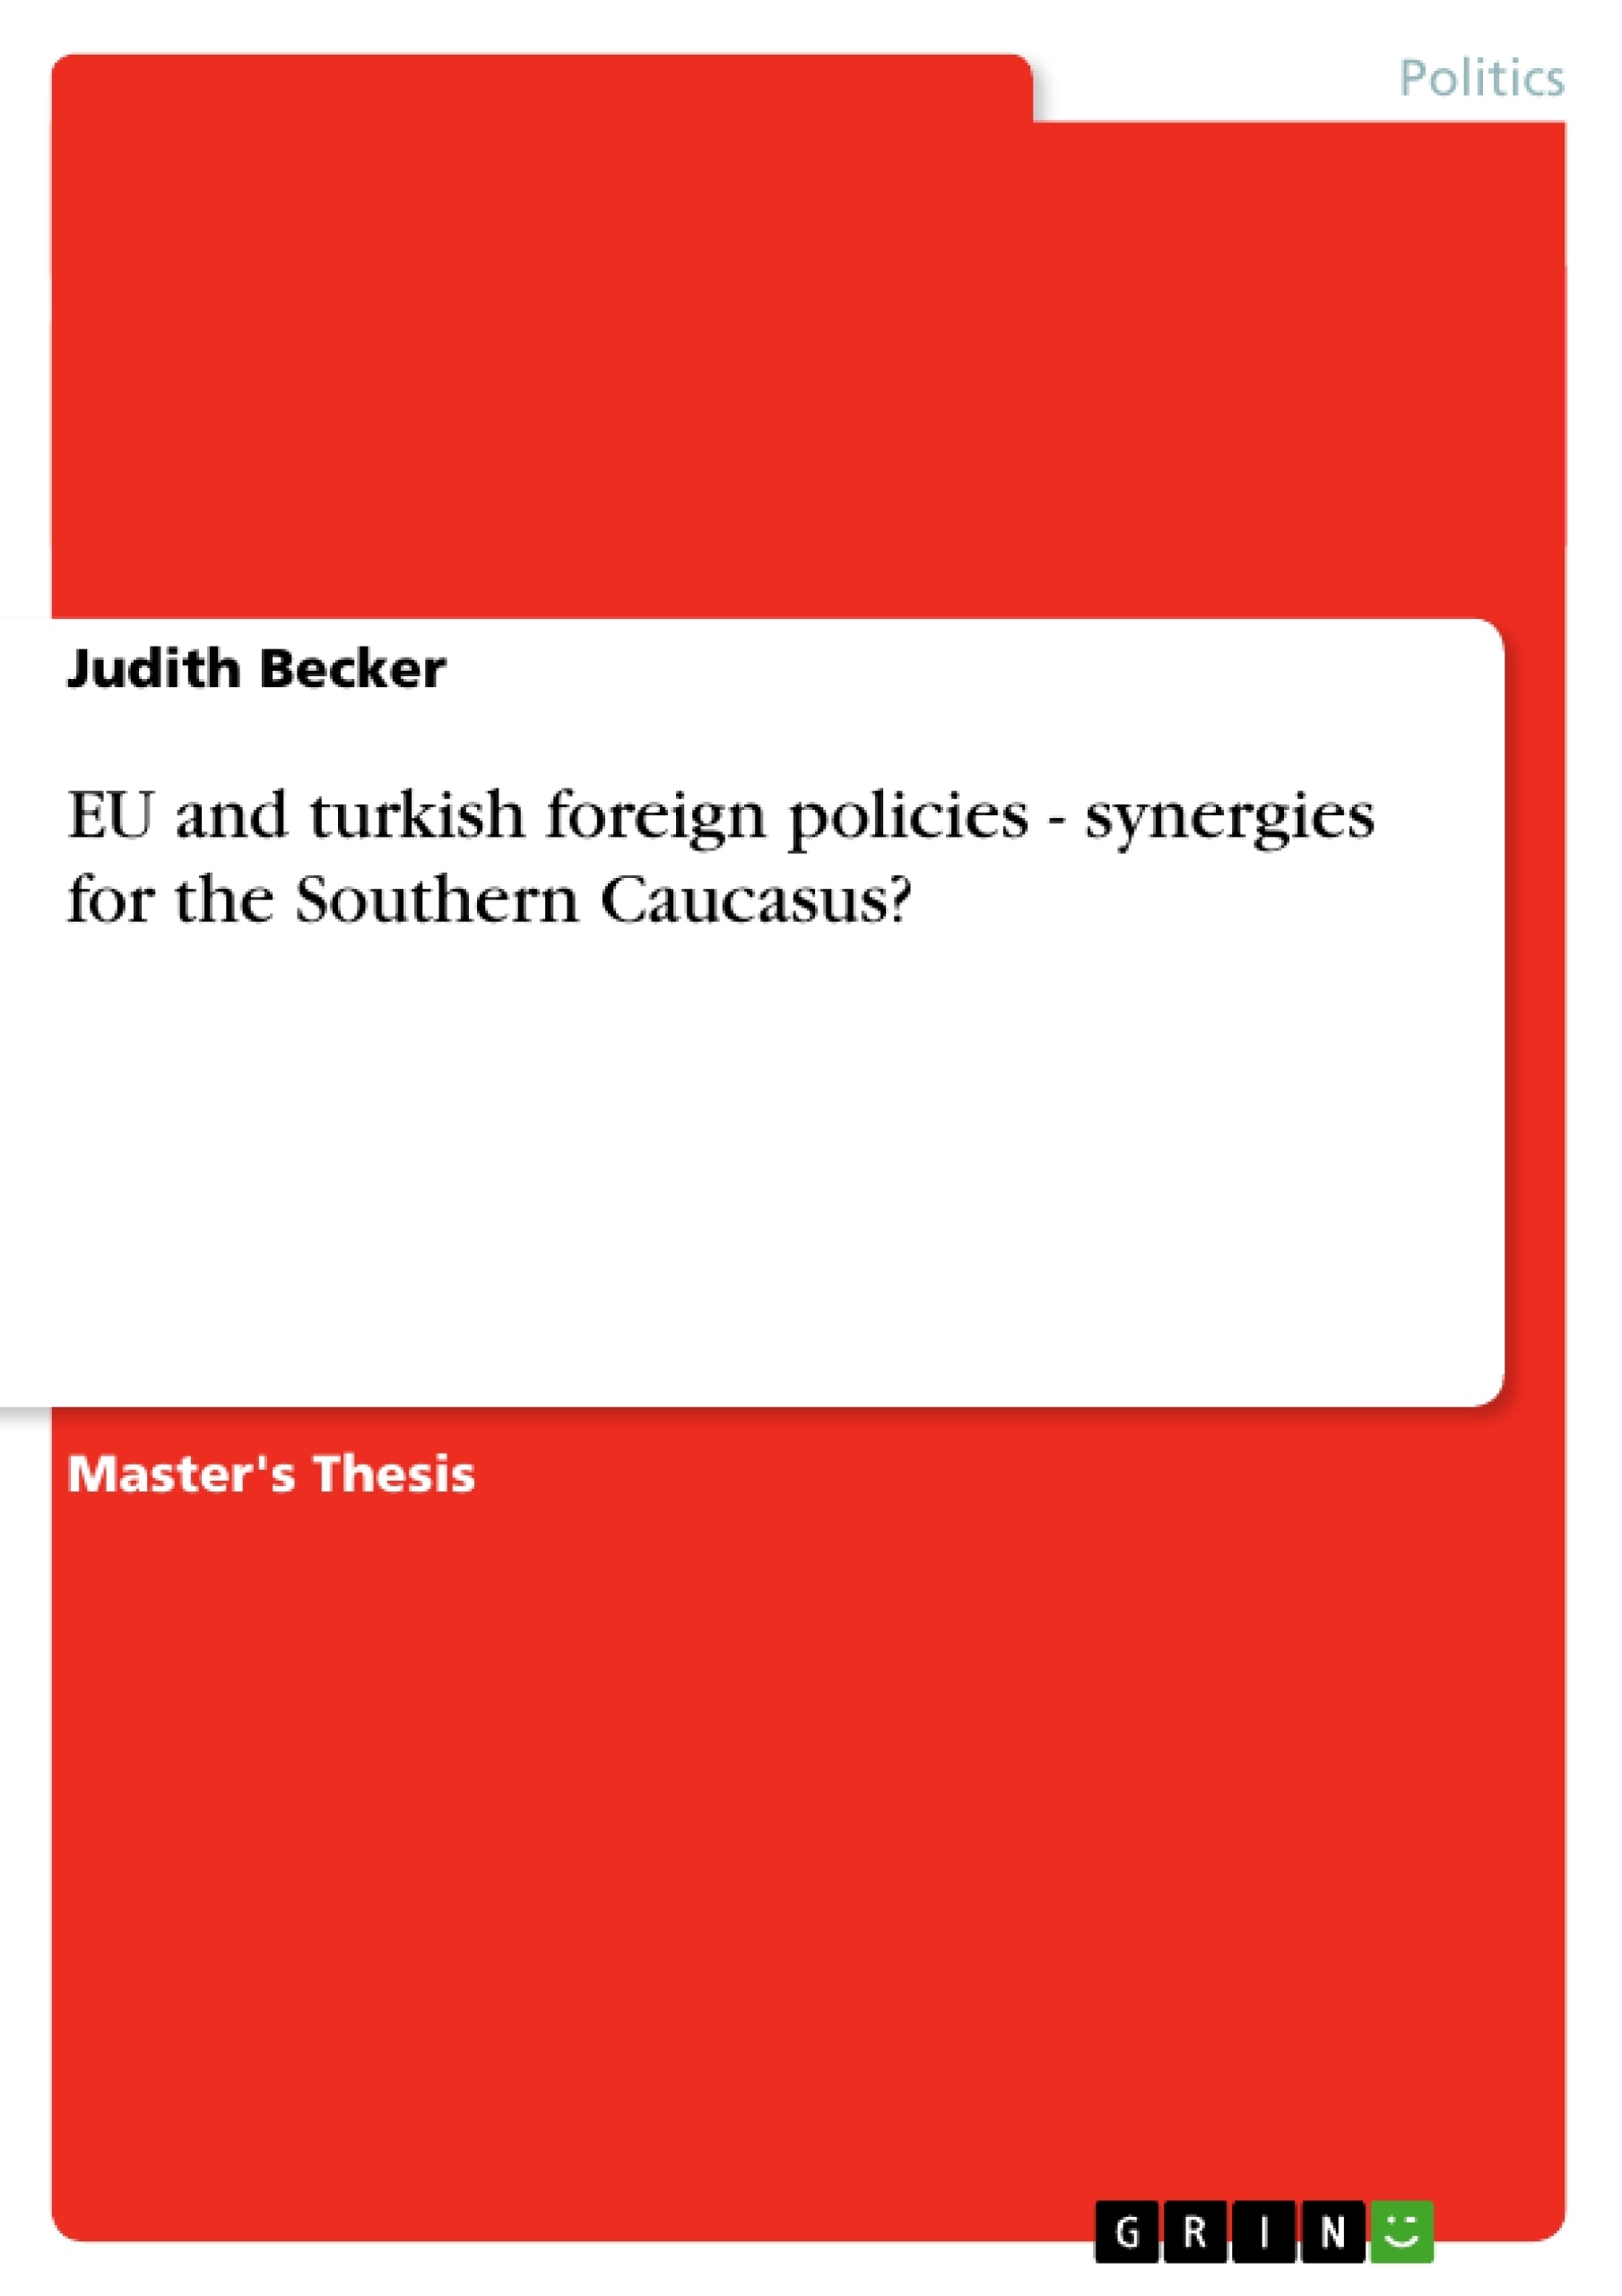 Title: EU and turkish foreign policies - synergies for the Southern Caucasus?